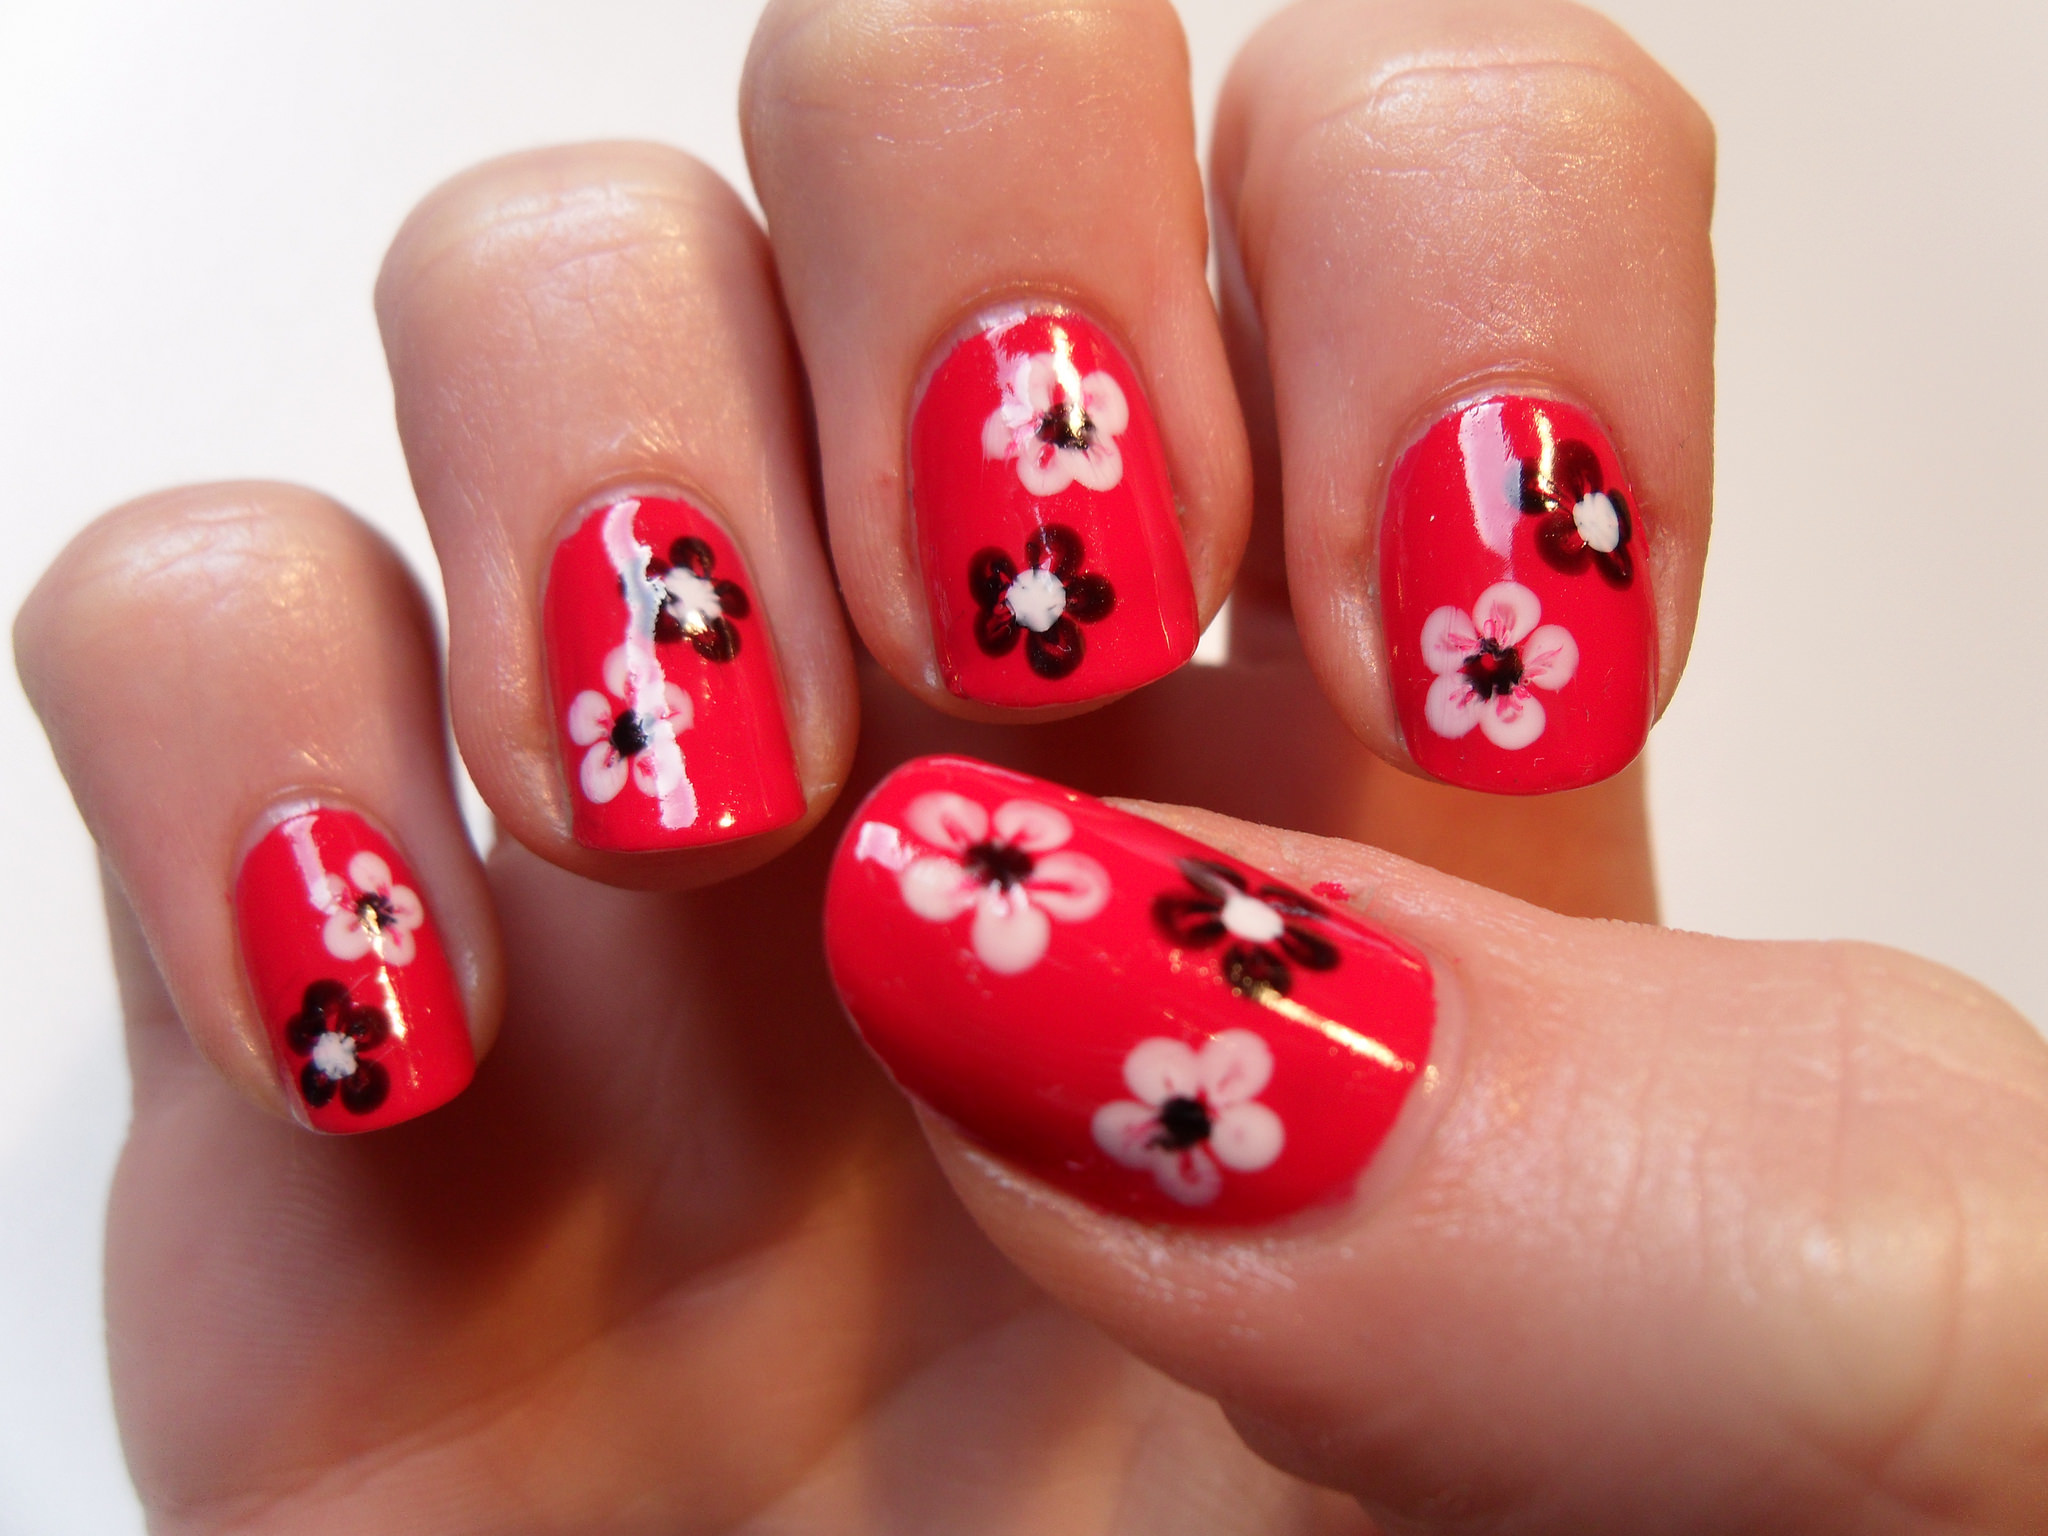 floral nail art on red nails